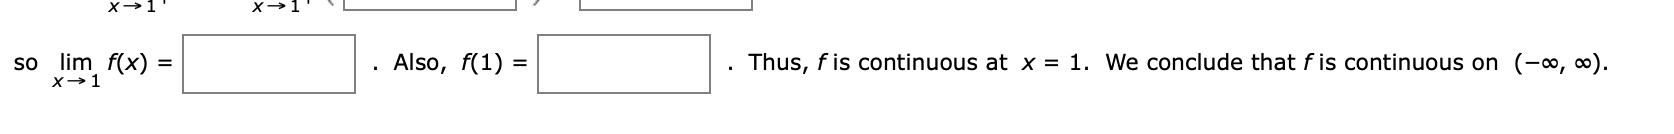 so lim f(x) =
Also, f(1) =
Thus, fis continuous at x = 1. We conclude that f is continuous on (-∞, ∞).
